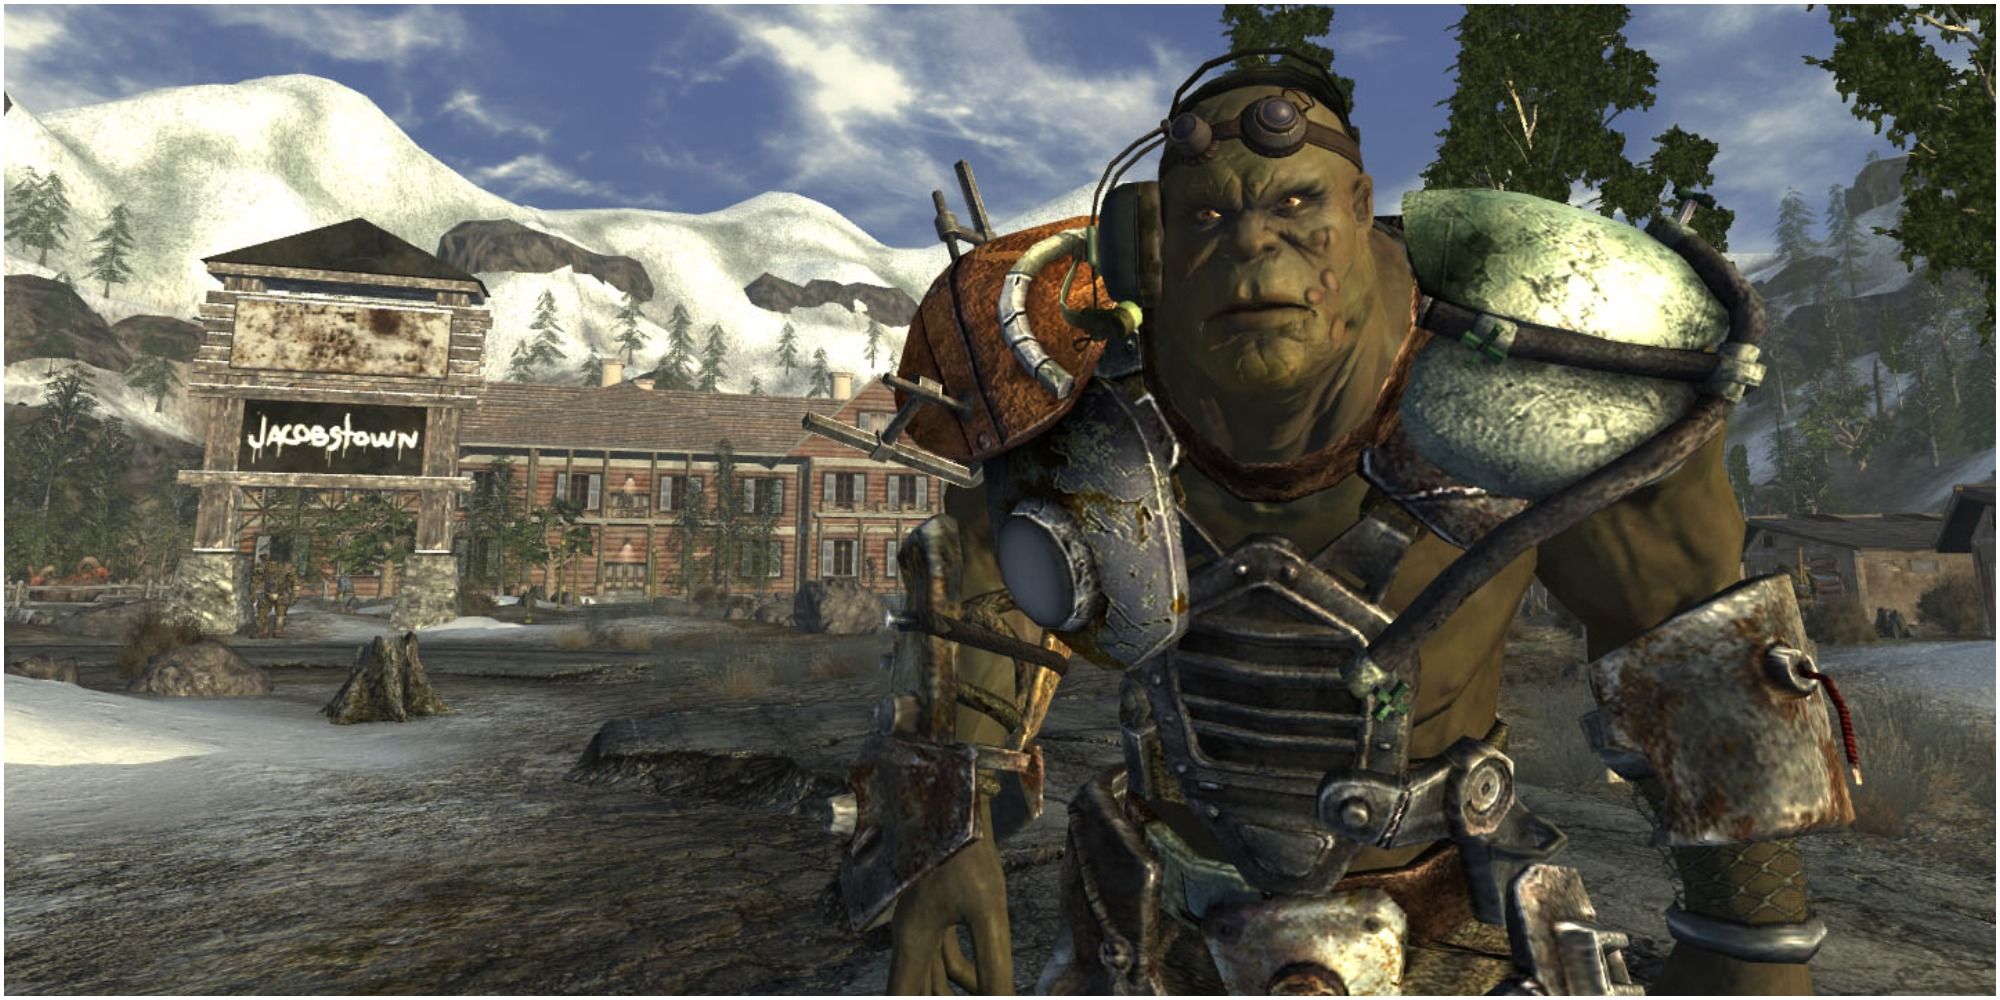 The Super Mutant Marcus from Fallout: New Vegas